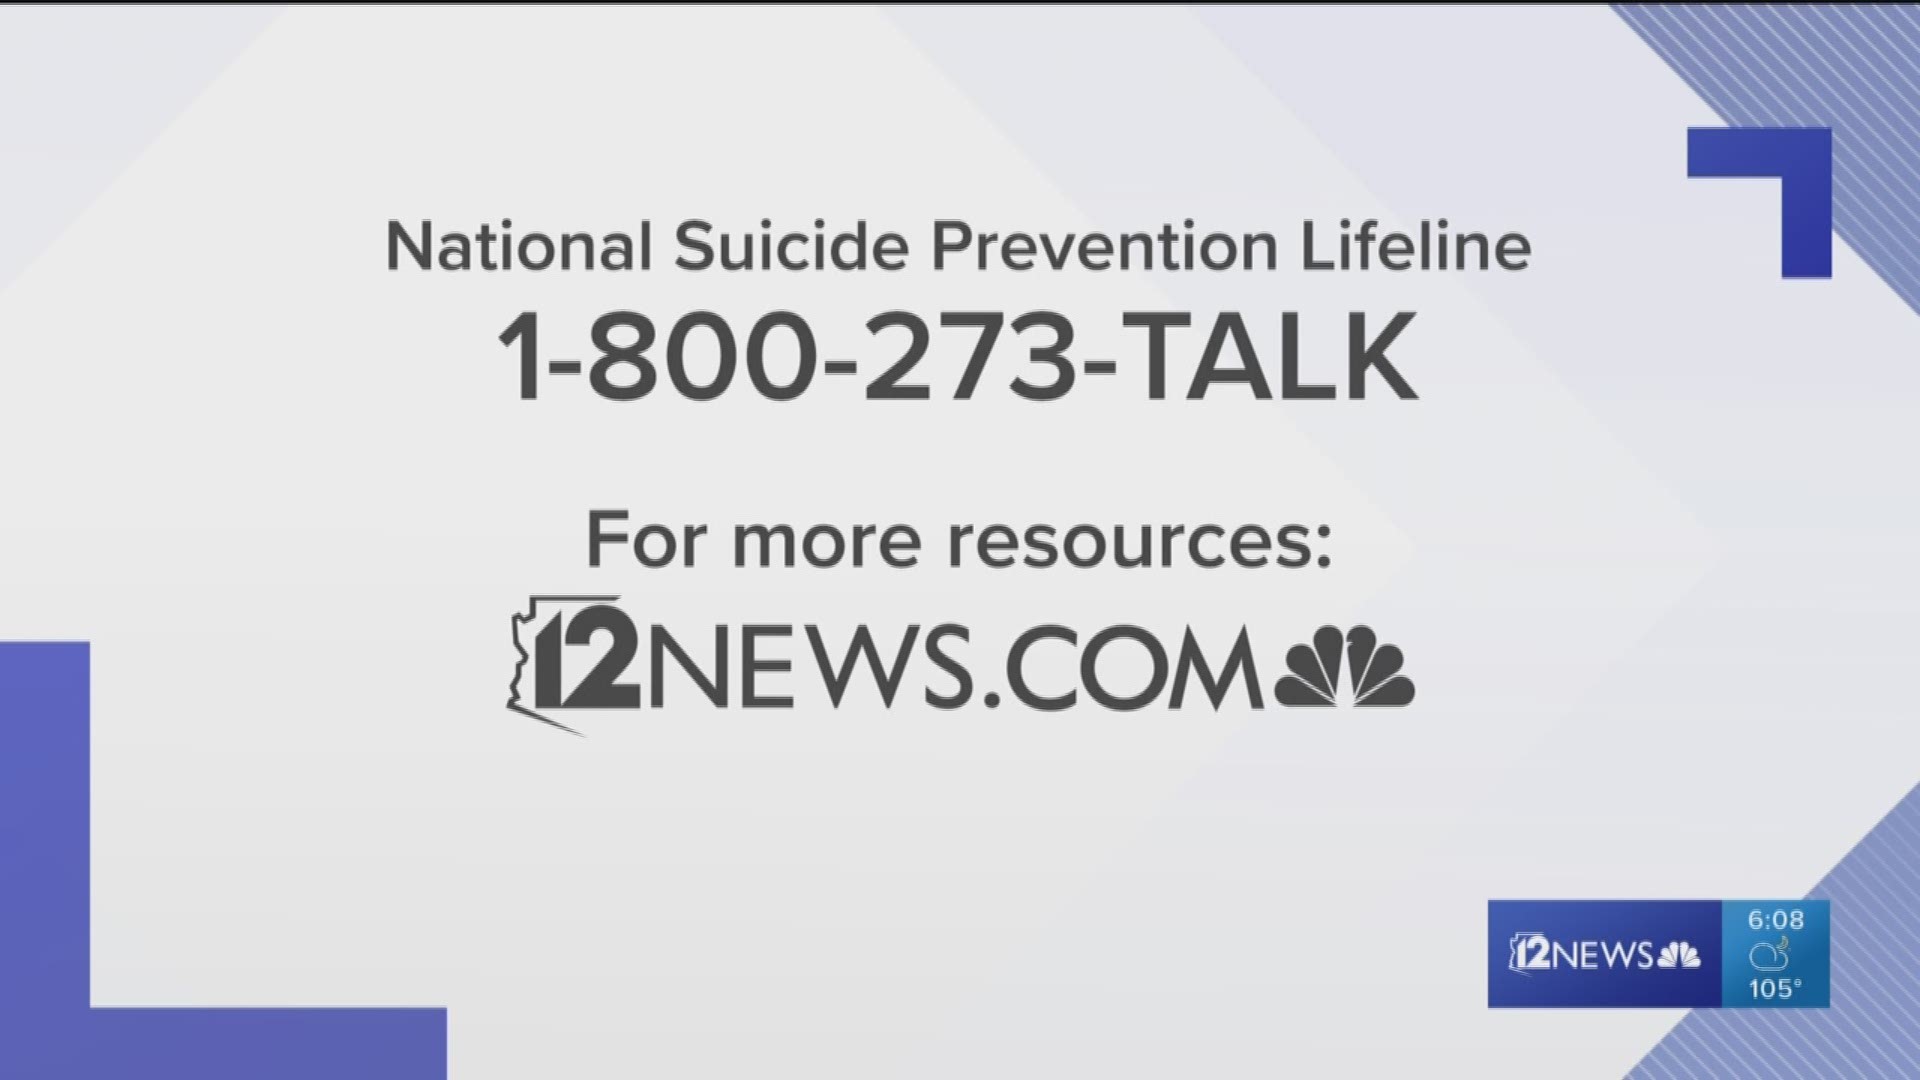 Suicide is the 10th leading cause of death in the United States and, according to the Centers for Disease Control, the mental health condition has increased across the country.